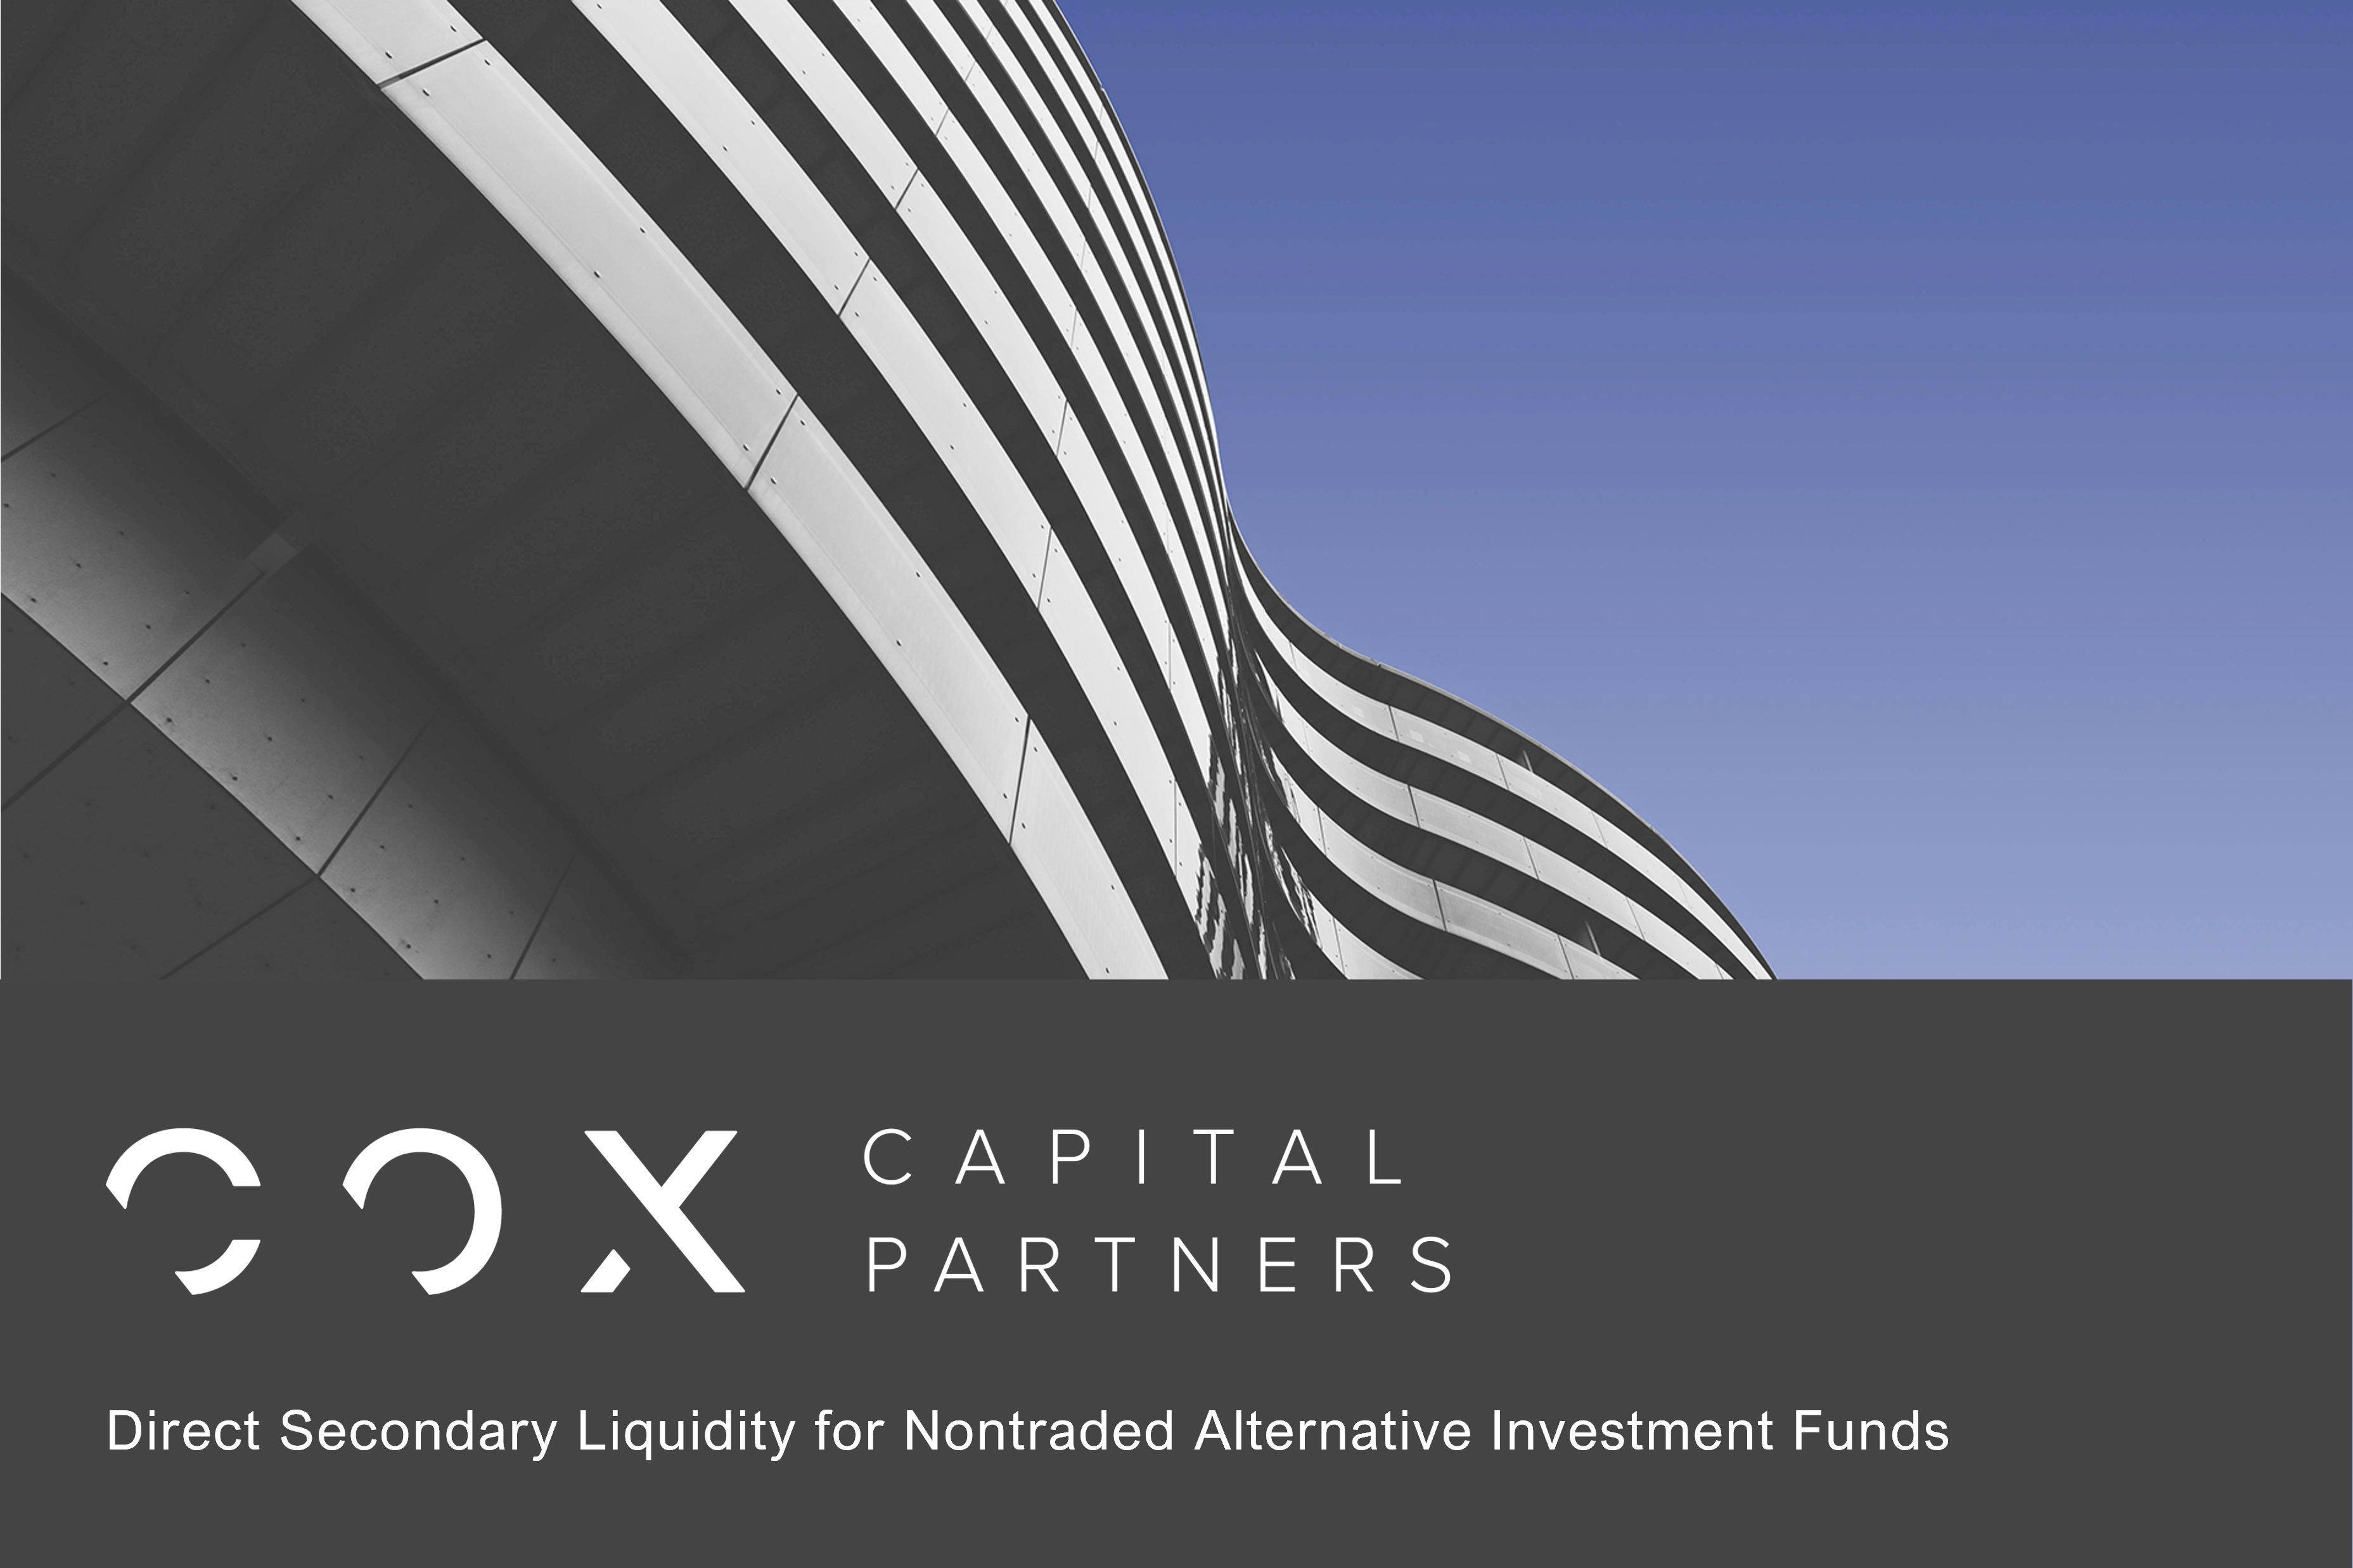 SPONSORED: Cox Capital Partners Provides Direct Secondary Liquidity for Nontraded  Alts